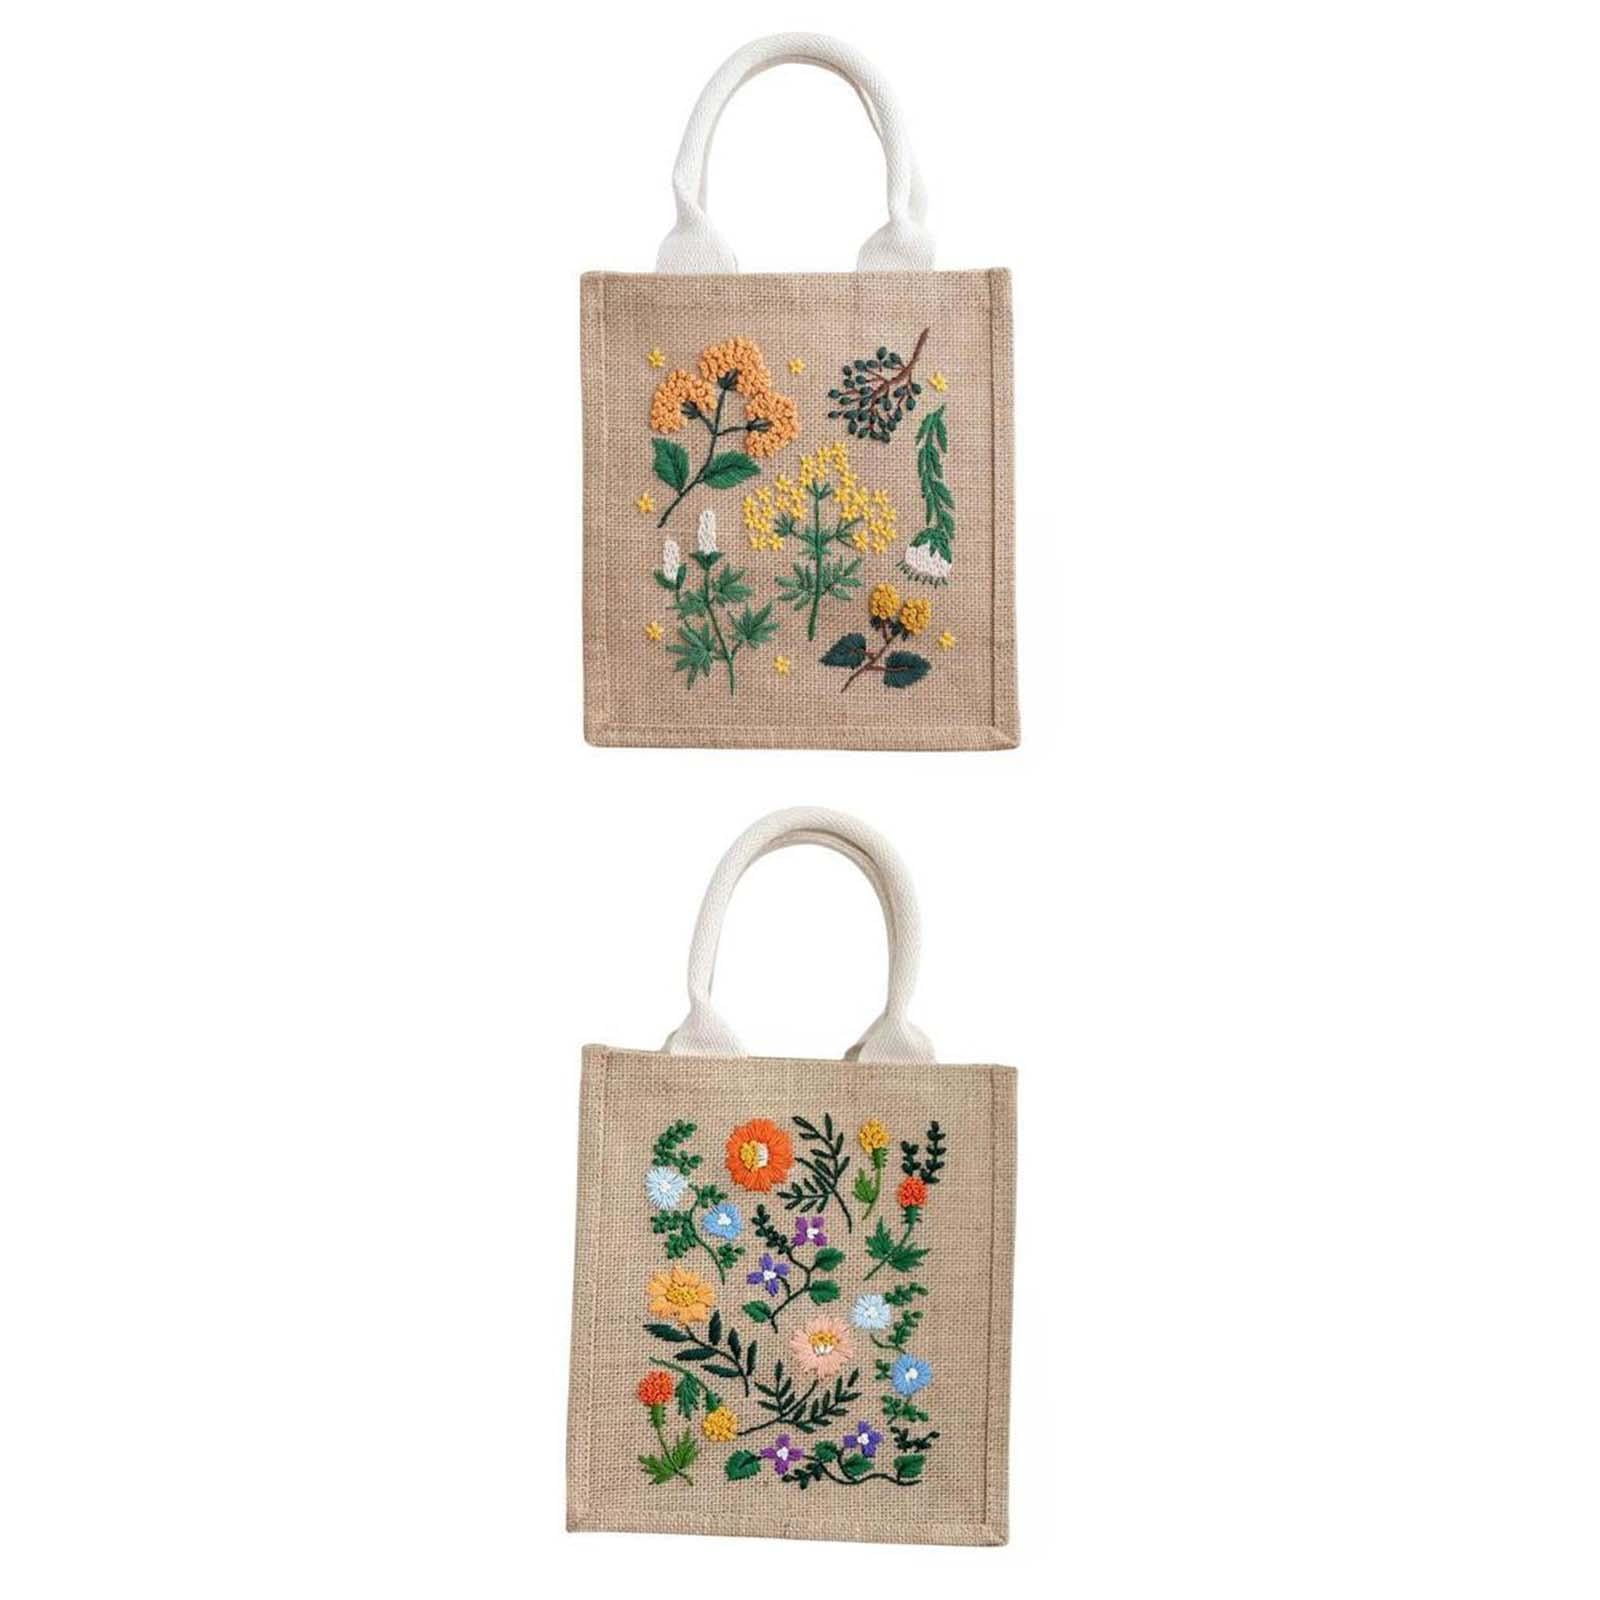 Decorating Canvas Bags Hot Sale - www.edoc.com.vn 1694907241